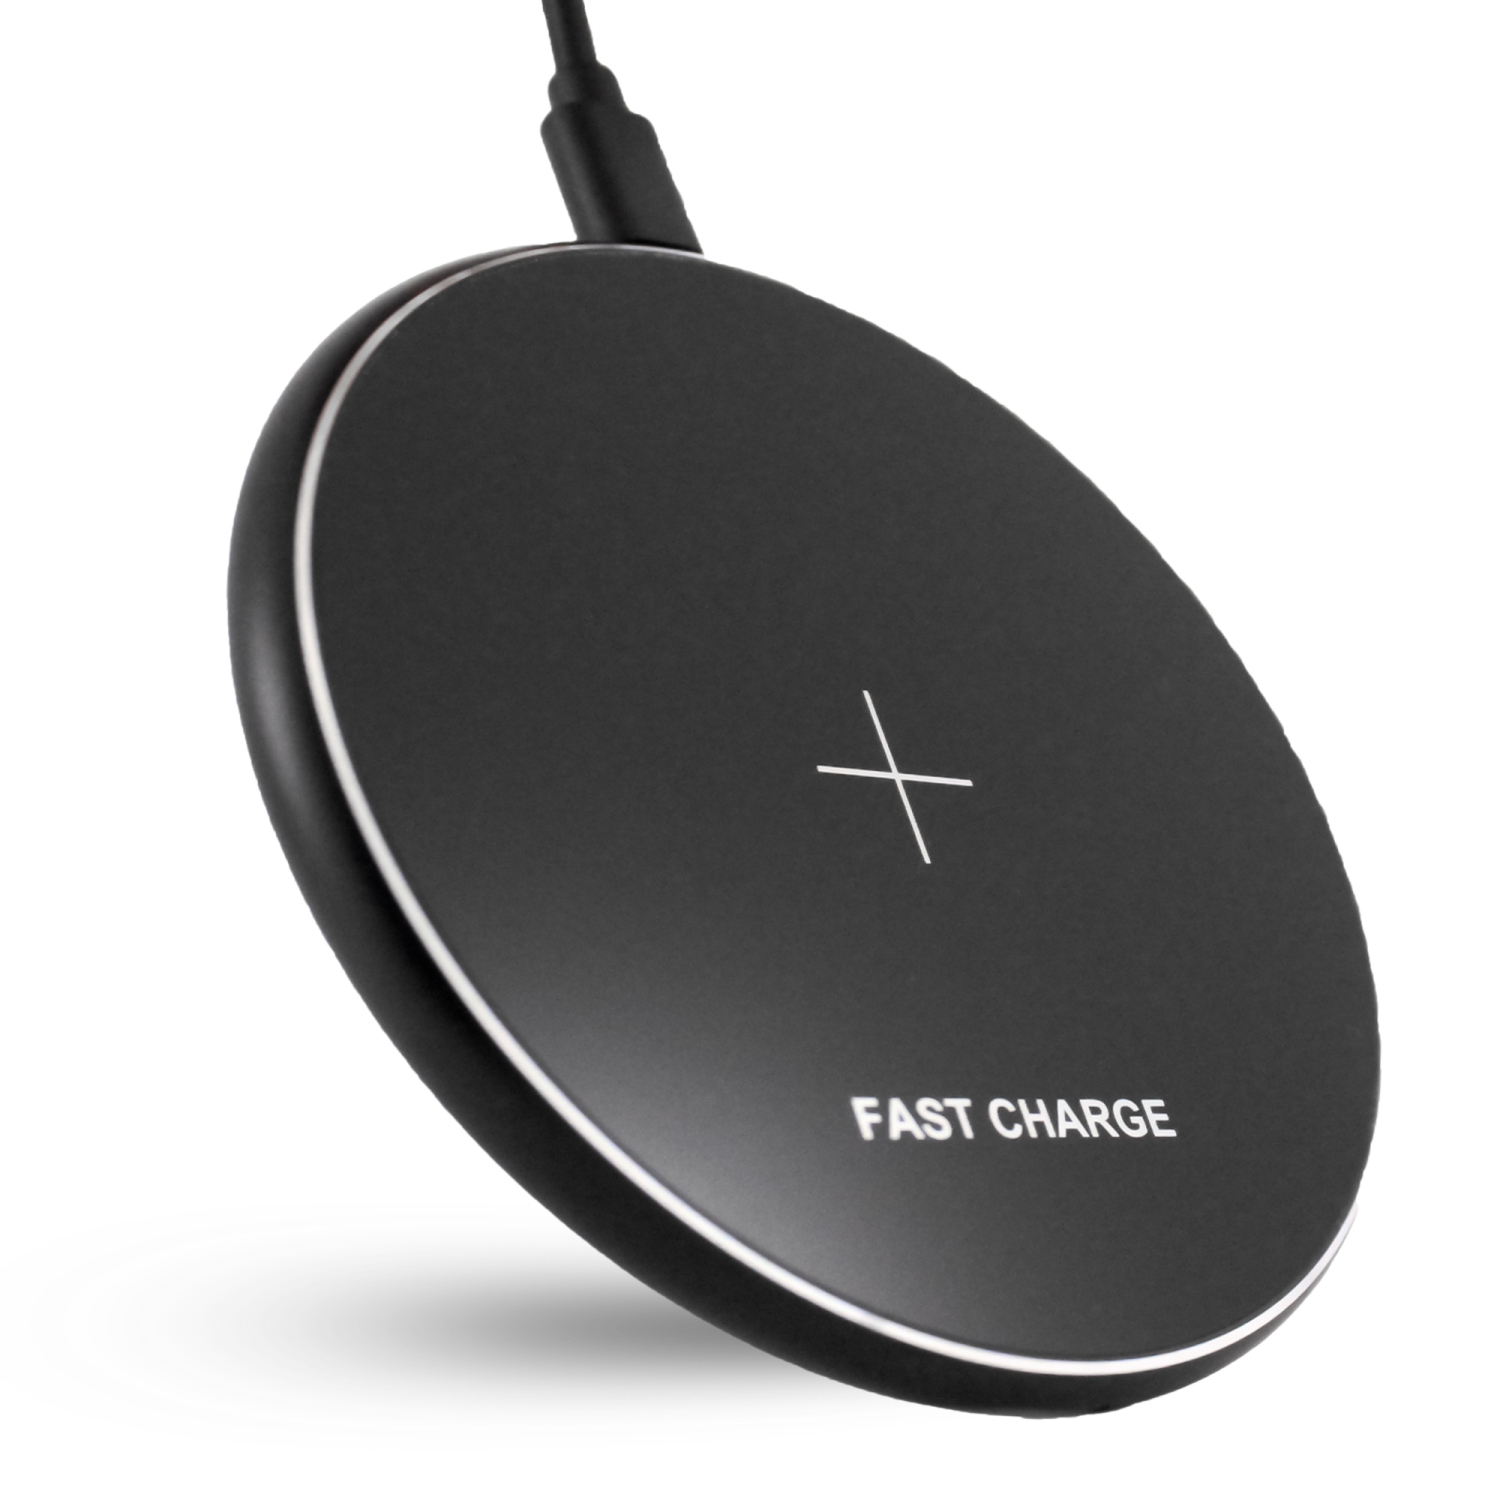 Etallic Swift Fast Wireless Charging Pad, Qi-Certified, 7.5W for APPLE iPhone, 10W for SAMSUNG (No Adapter)